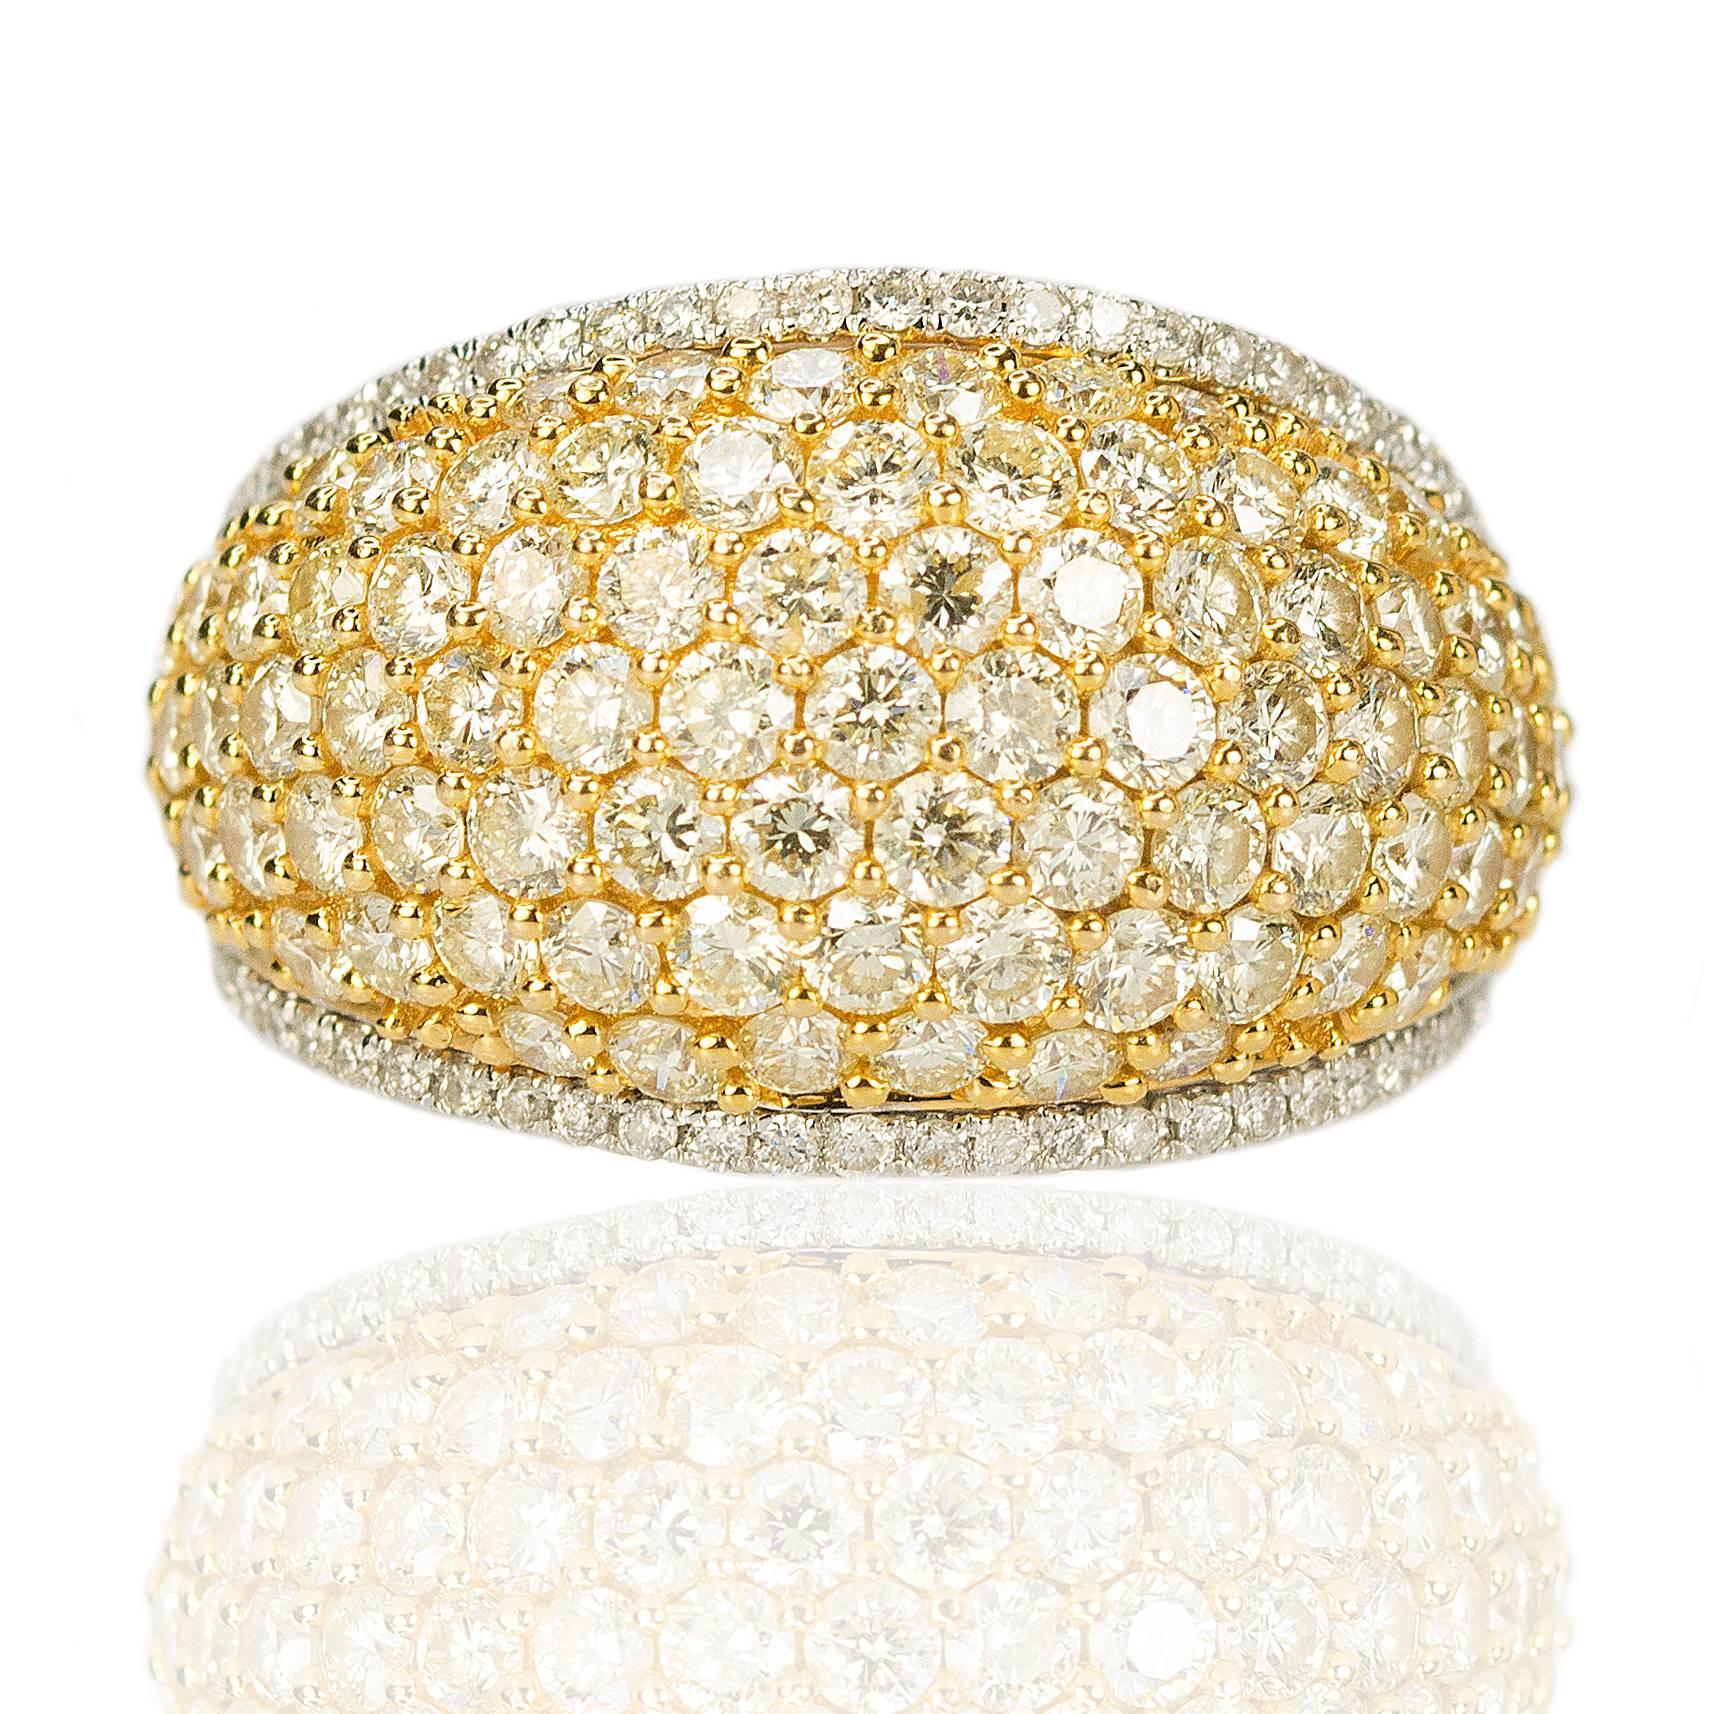 18k White and Yellow Gold Ring  with approximately 3.80 carats of collection color clarity ideal cut diamonds.  